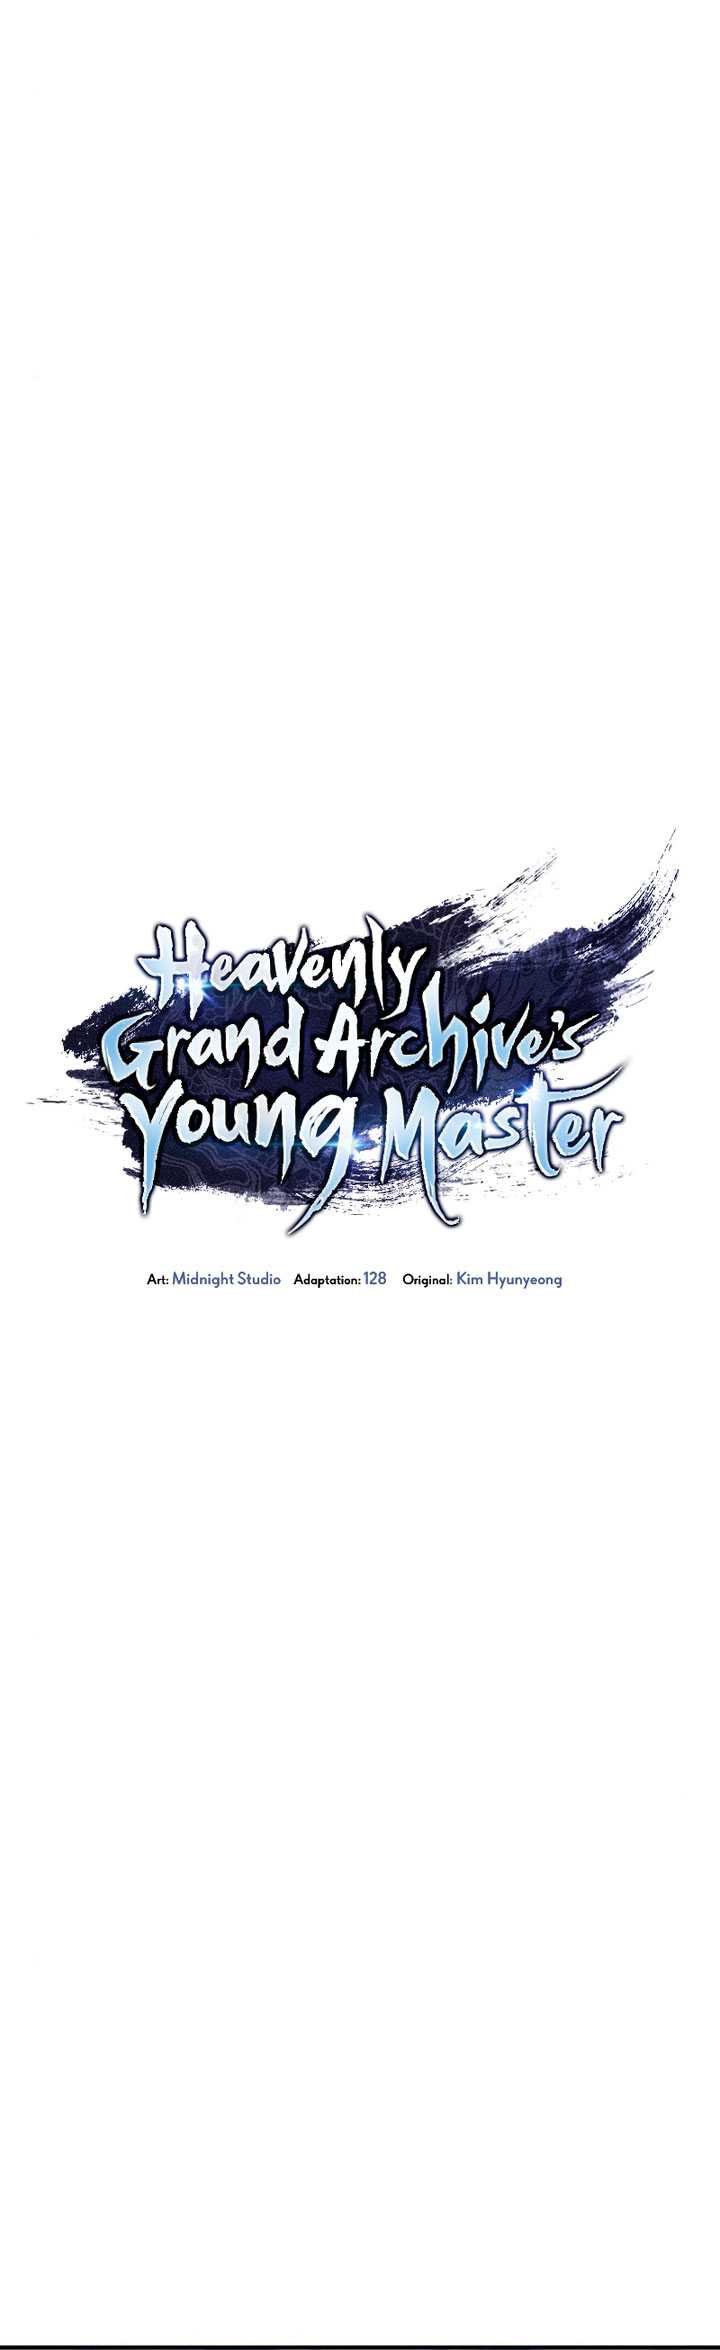 Heavenly Grand Archive’s Young Master Chapter 55